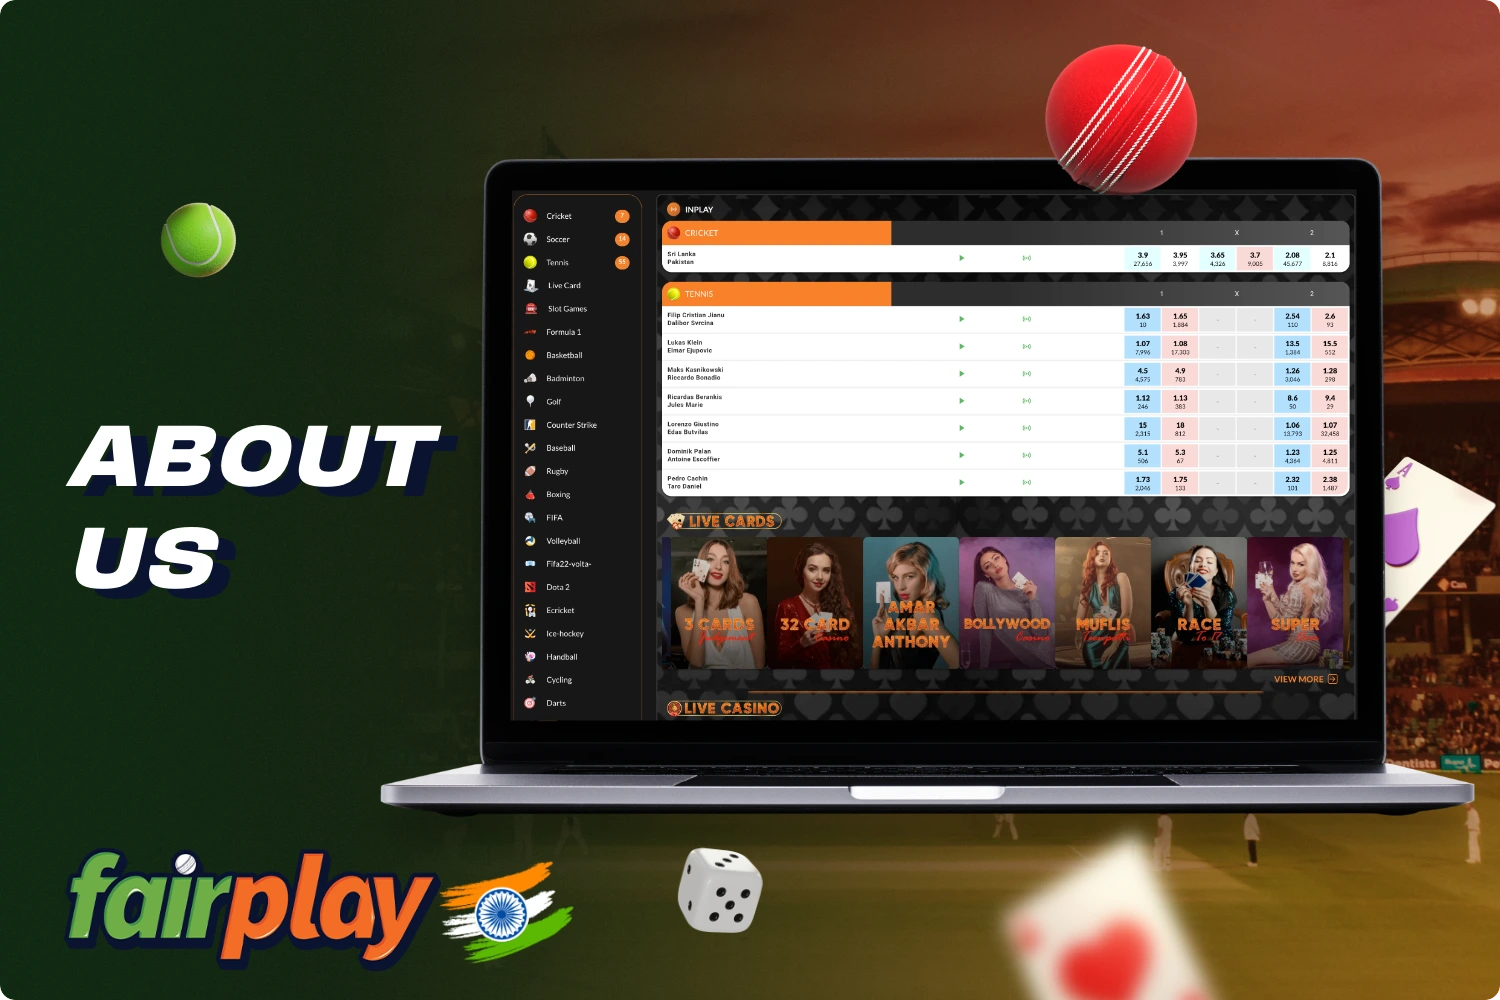 Fairplay has a special license to provide online sports betting and online casino gaming to Indian users